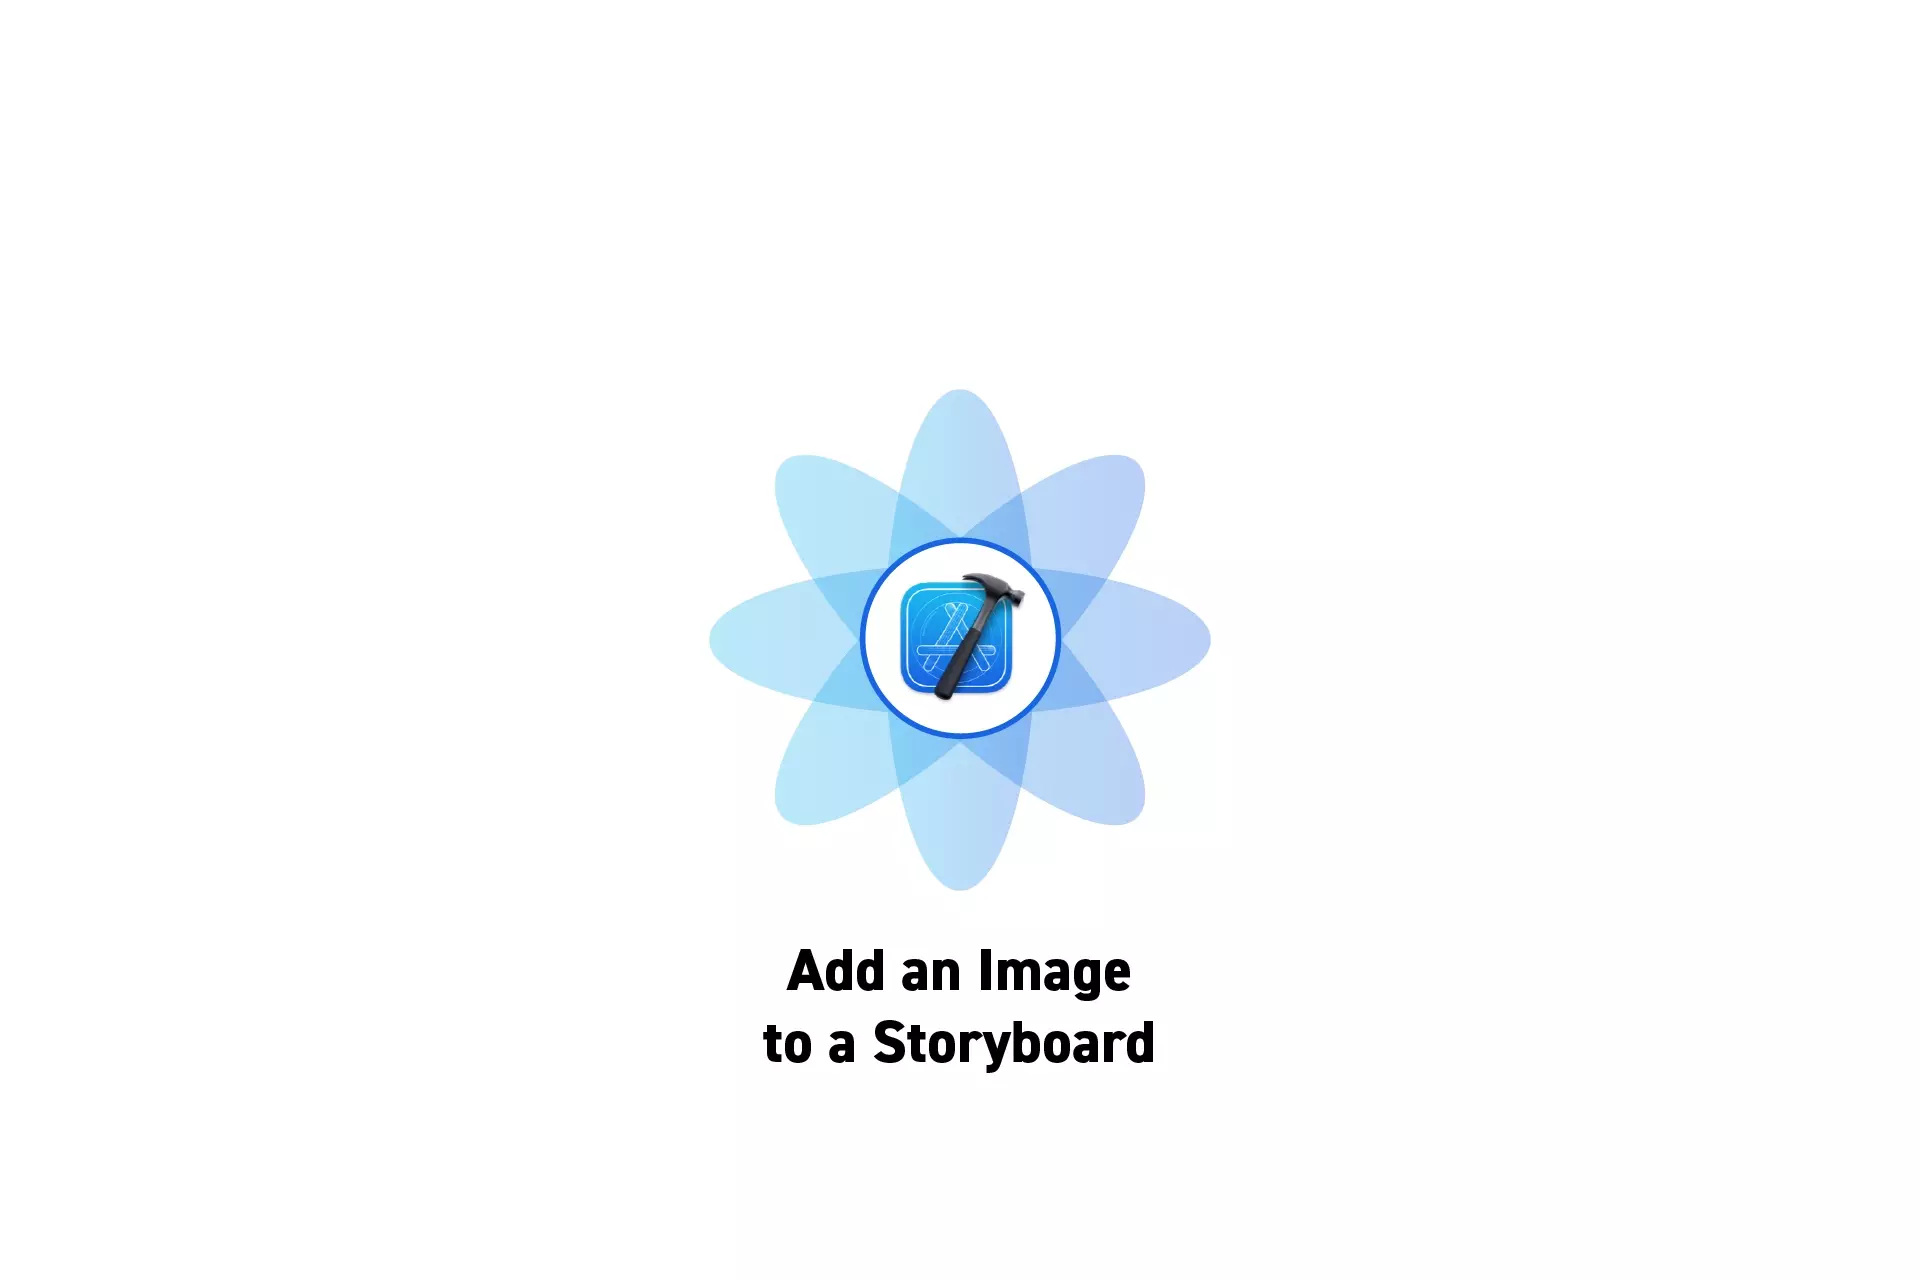 A flower that represents Xcode with the text "Add an Image to a Storyboard" beneath it.